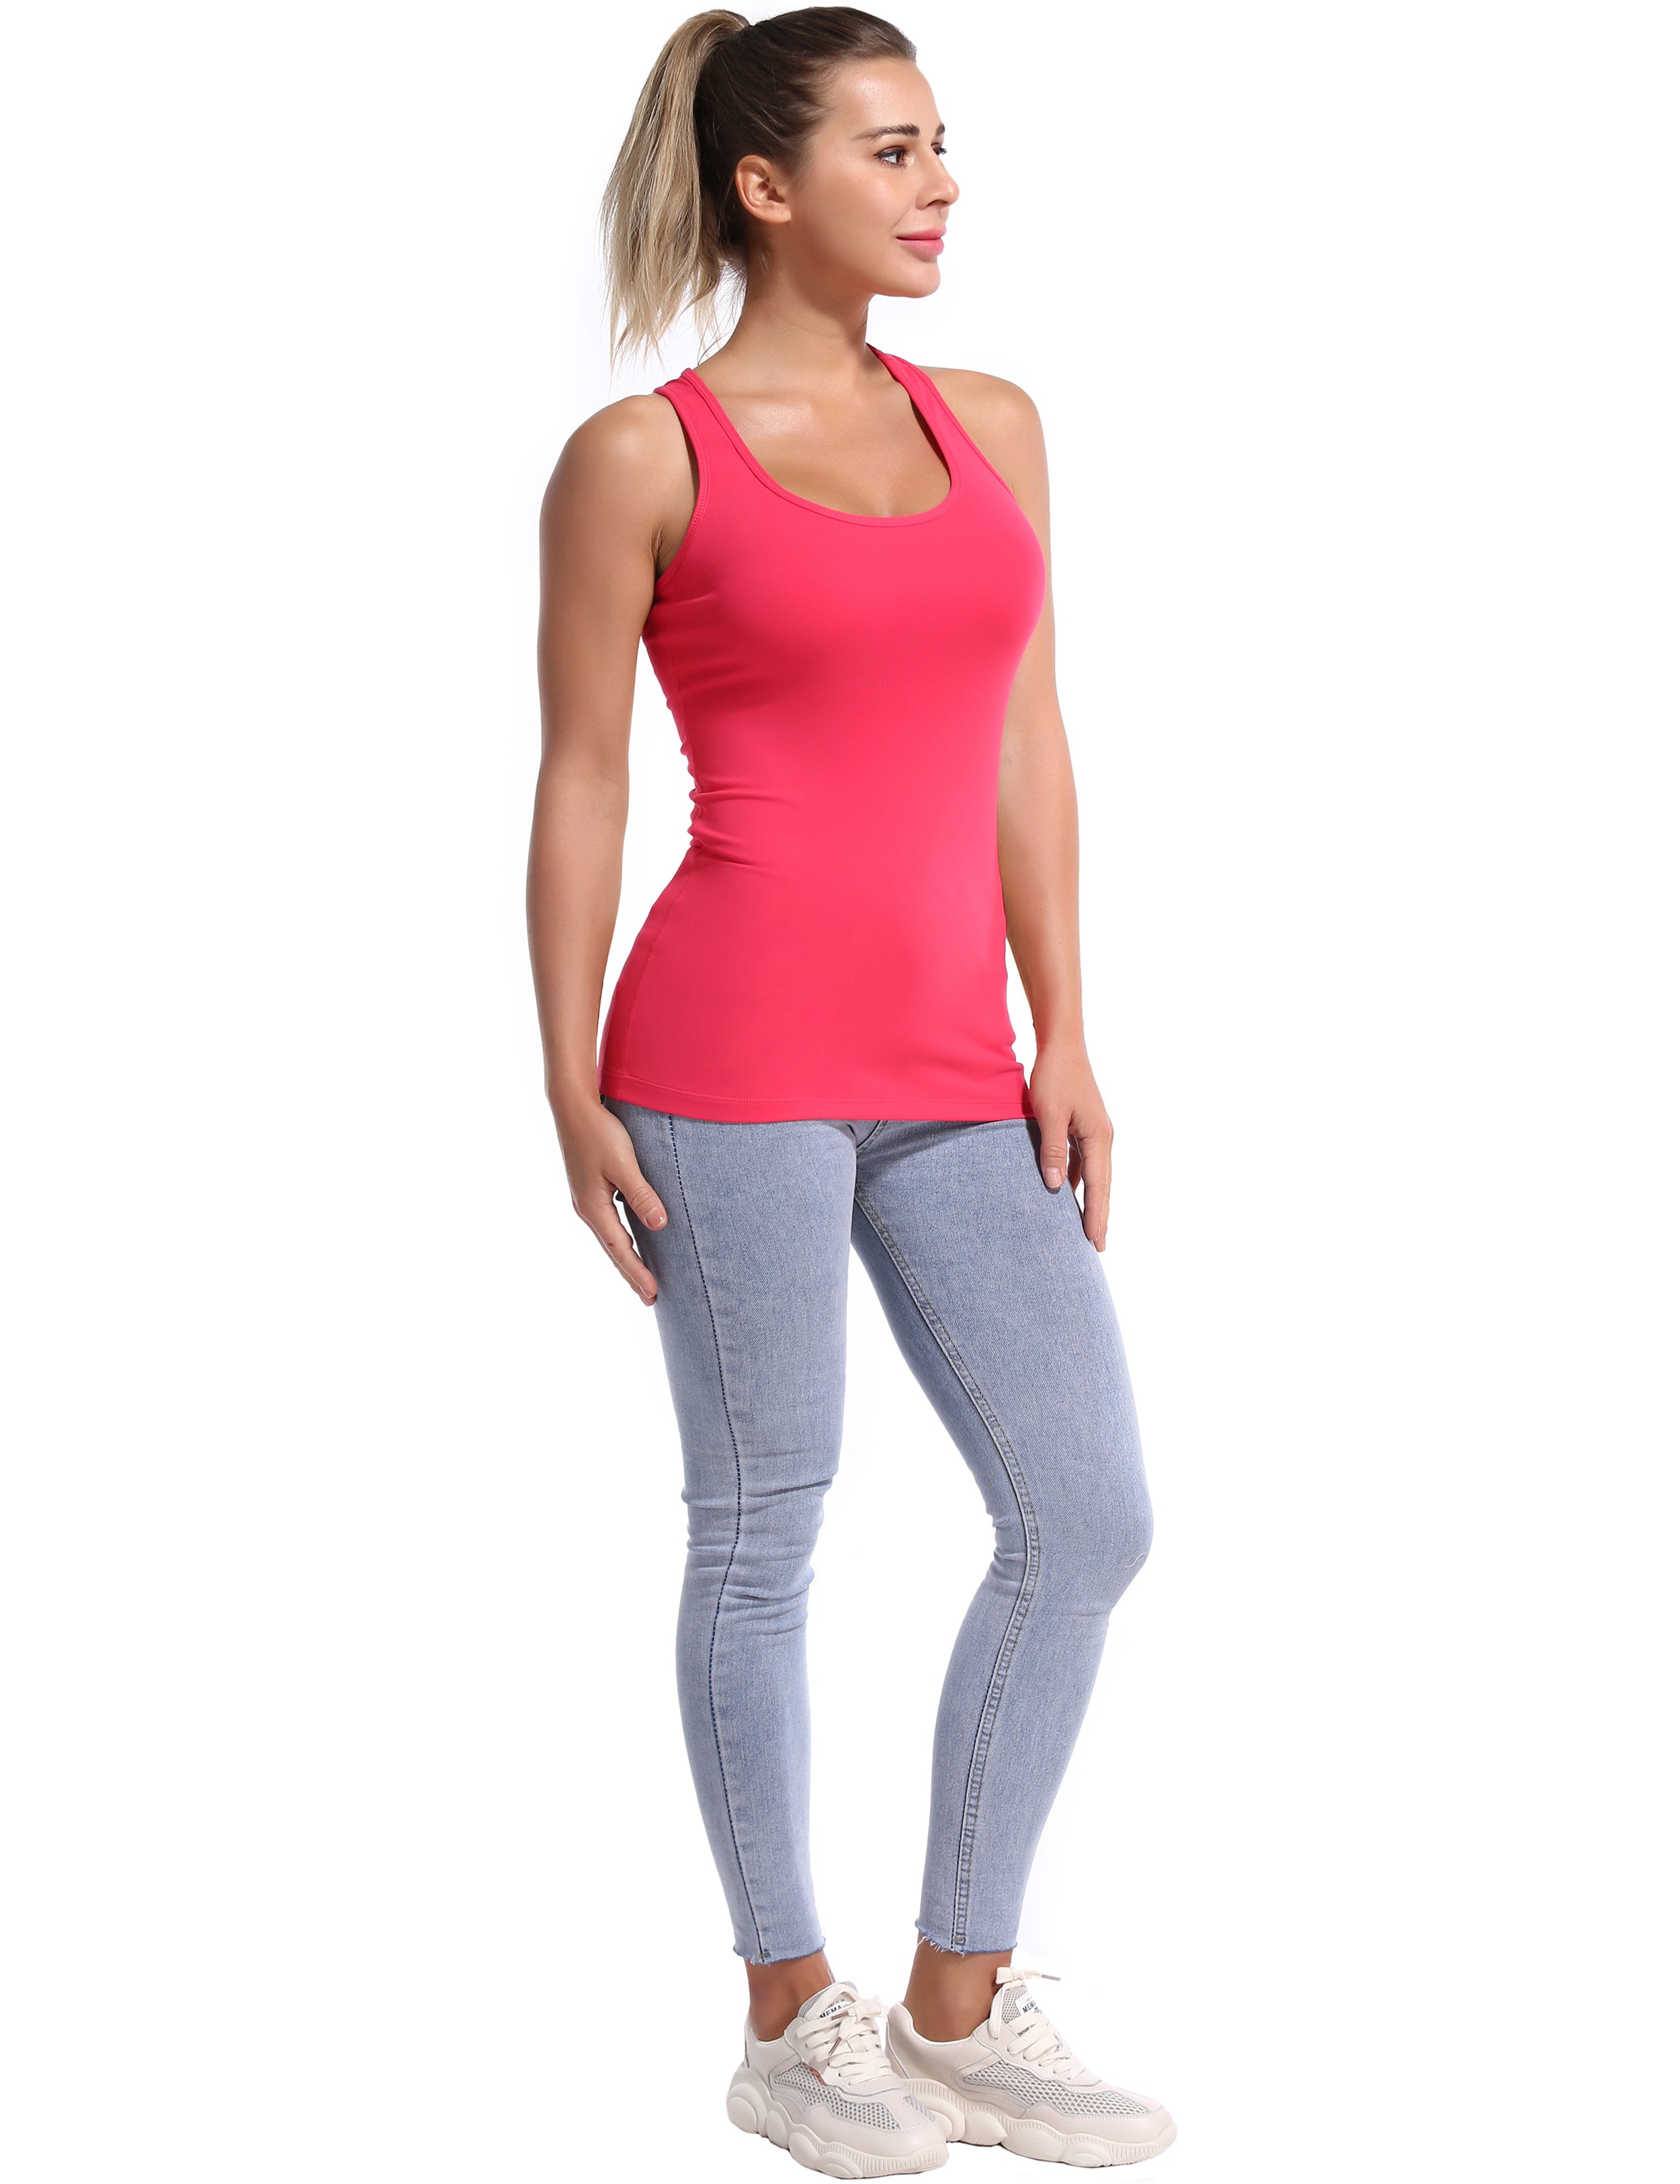 Racerback Athletic Tank Tops red 92%Nylon/8%Spandex(Cotton Soft) Designed for Golf Tight Fit So buttery soft, it feels weightless Sweat-wicking Four-way stretch Breathable Contours your body Sits below the waistband for moderate, everyday coverage